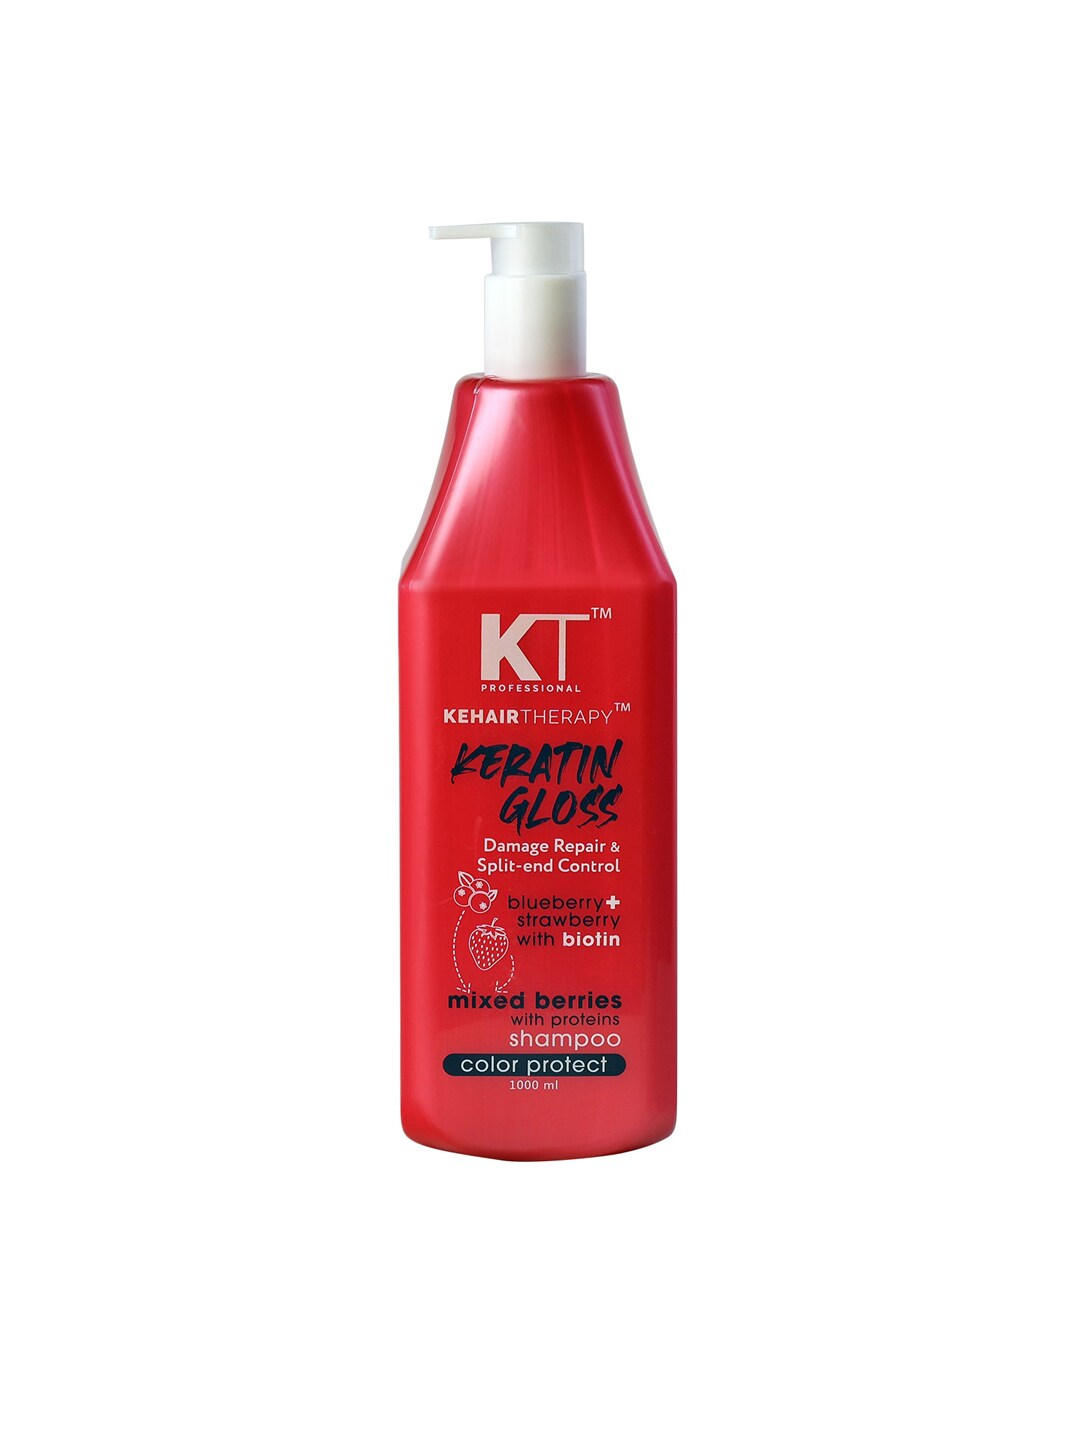 KEHAIRTHERAPY Professional Keratin Gloss Damage Repair Color Protect Shampoo - 1000ml Price in India